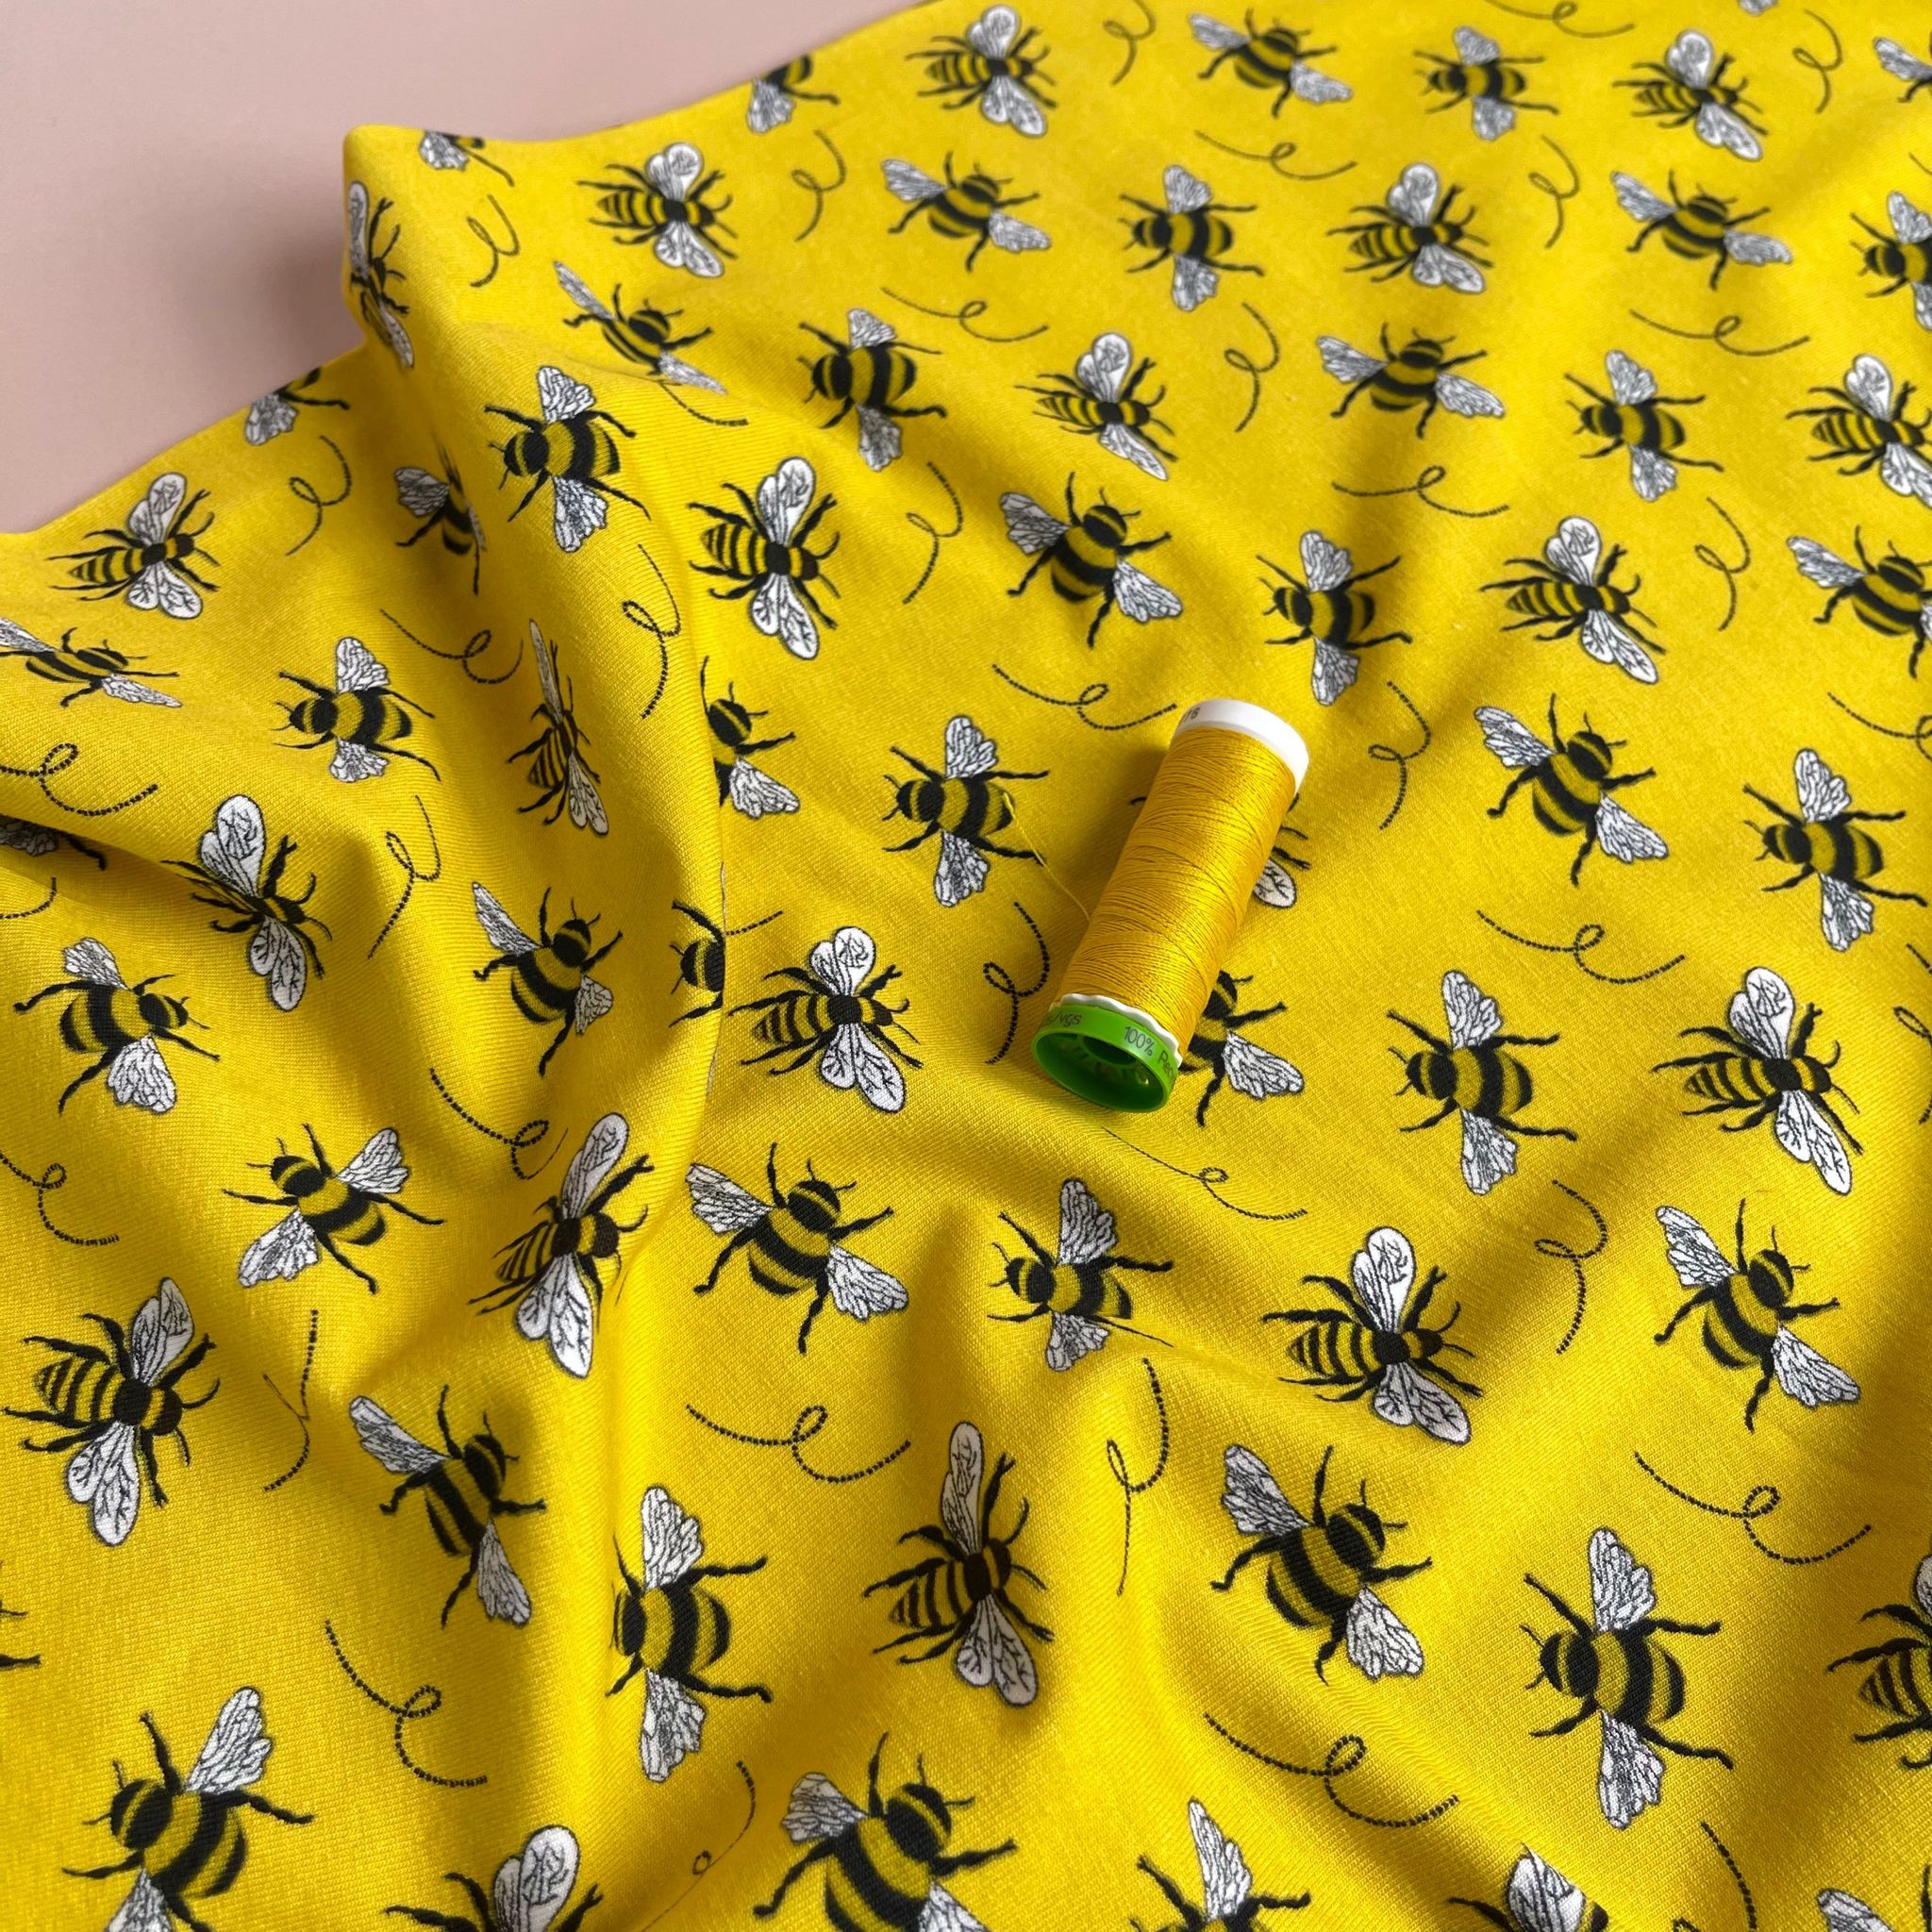 Busy Bees Organic Cotton Knit Fabric